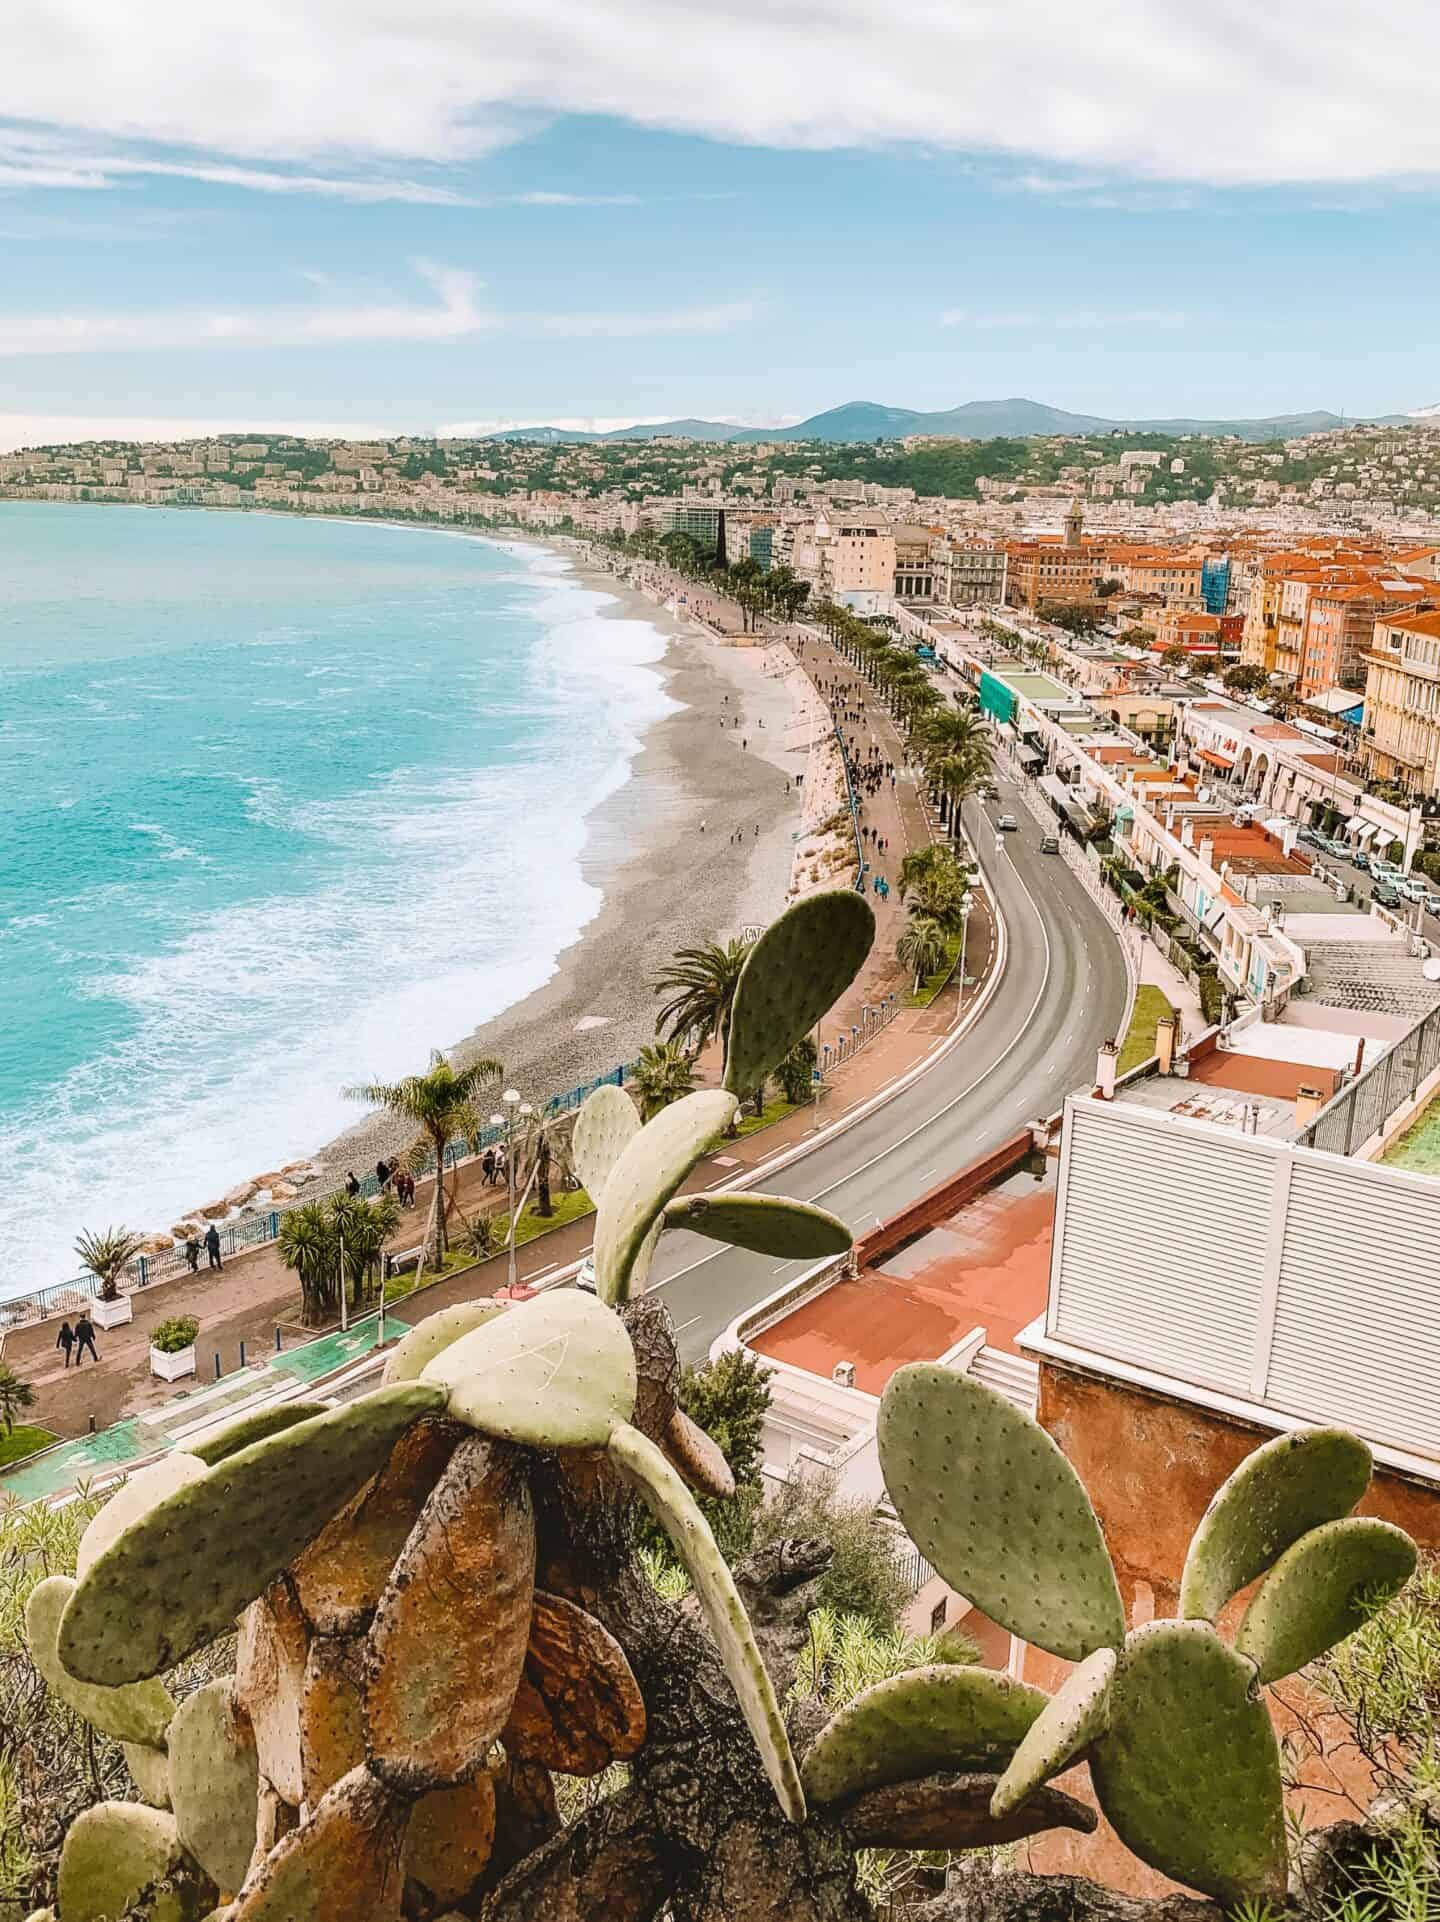 Stunning views of the Bay d'Anglais and the whole city of Nice